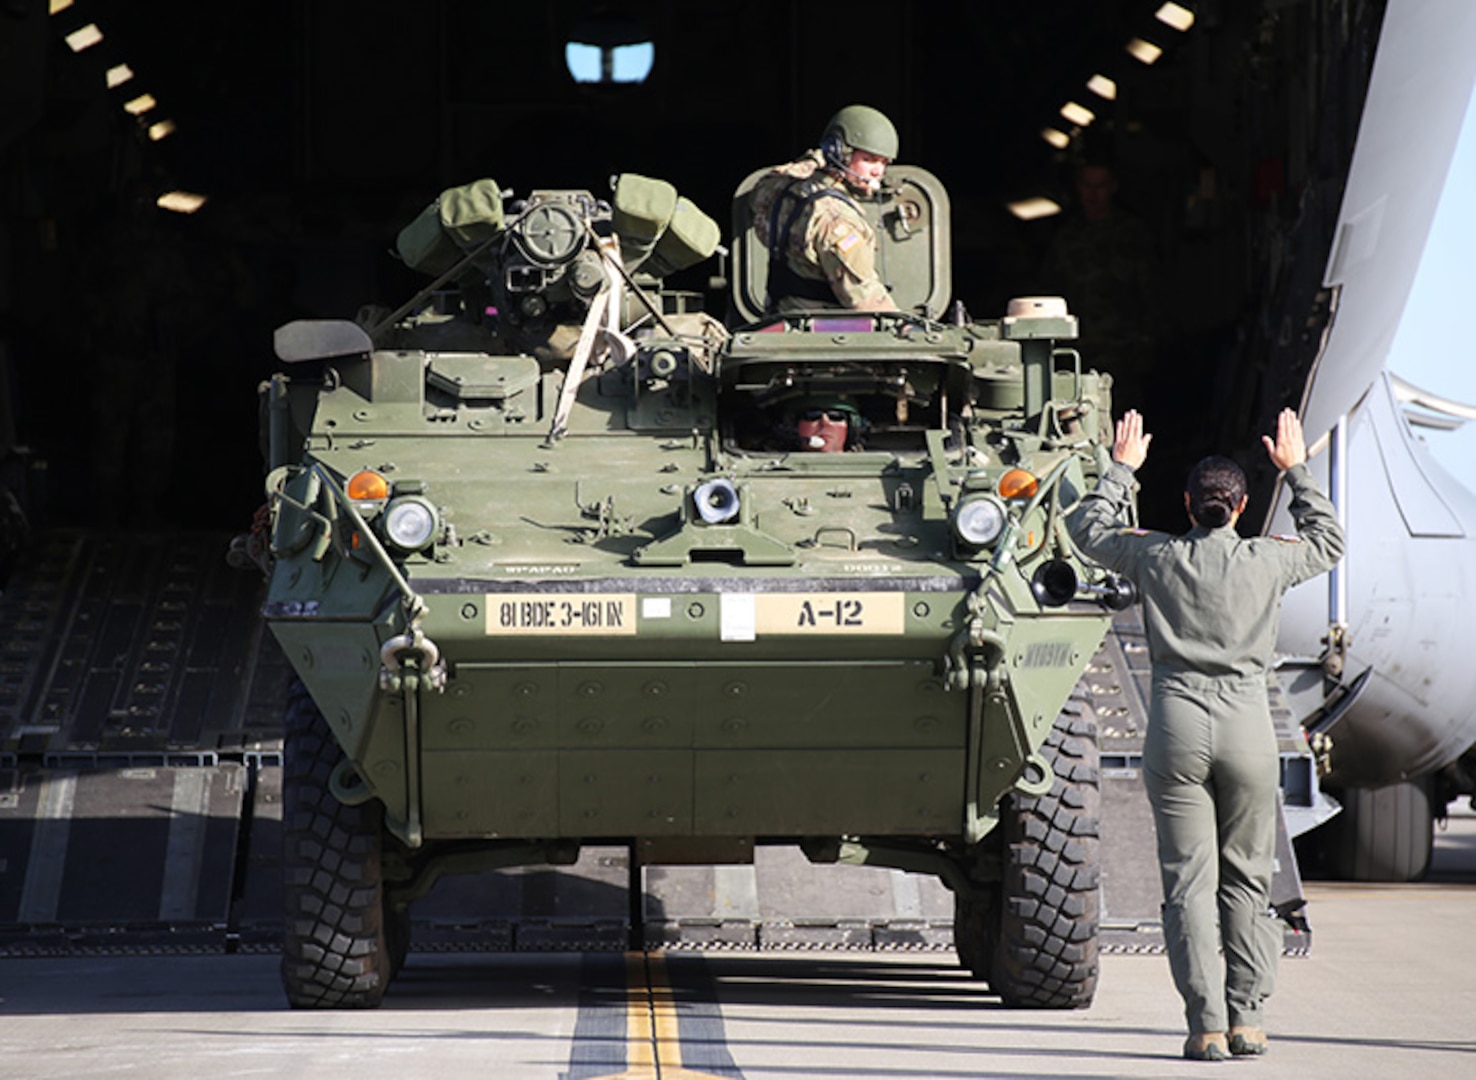 A Stryker from “Attack” Company, 3rd Battalion, 161st Infantry Regiment is being loaded in to a C-17 operated by the 62nd Airlift Wing at Grays Army Airfield, Joint Base Lewis-McChord, on April 4, 2019. The equipment load up was part of a week-long training exercise for the battalion that starts at unit home stations, flying to Moses Lake Airport, then convoying to Yakima Training Center.